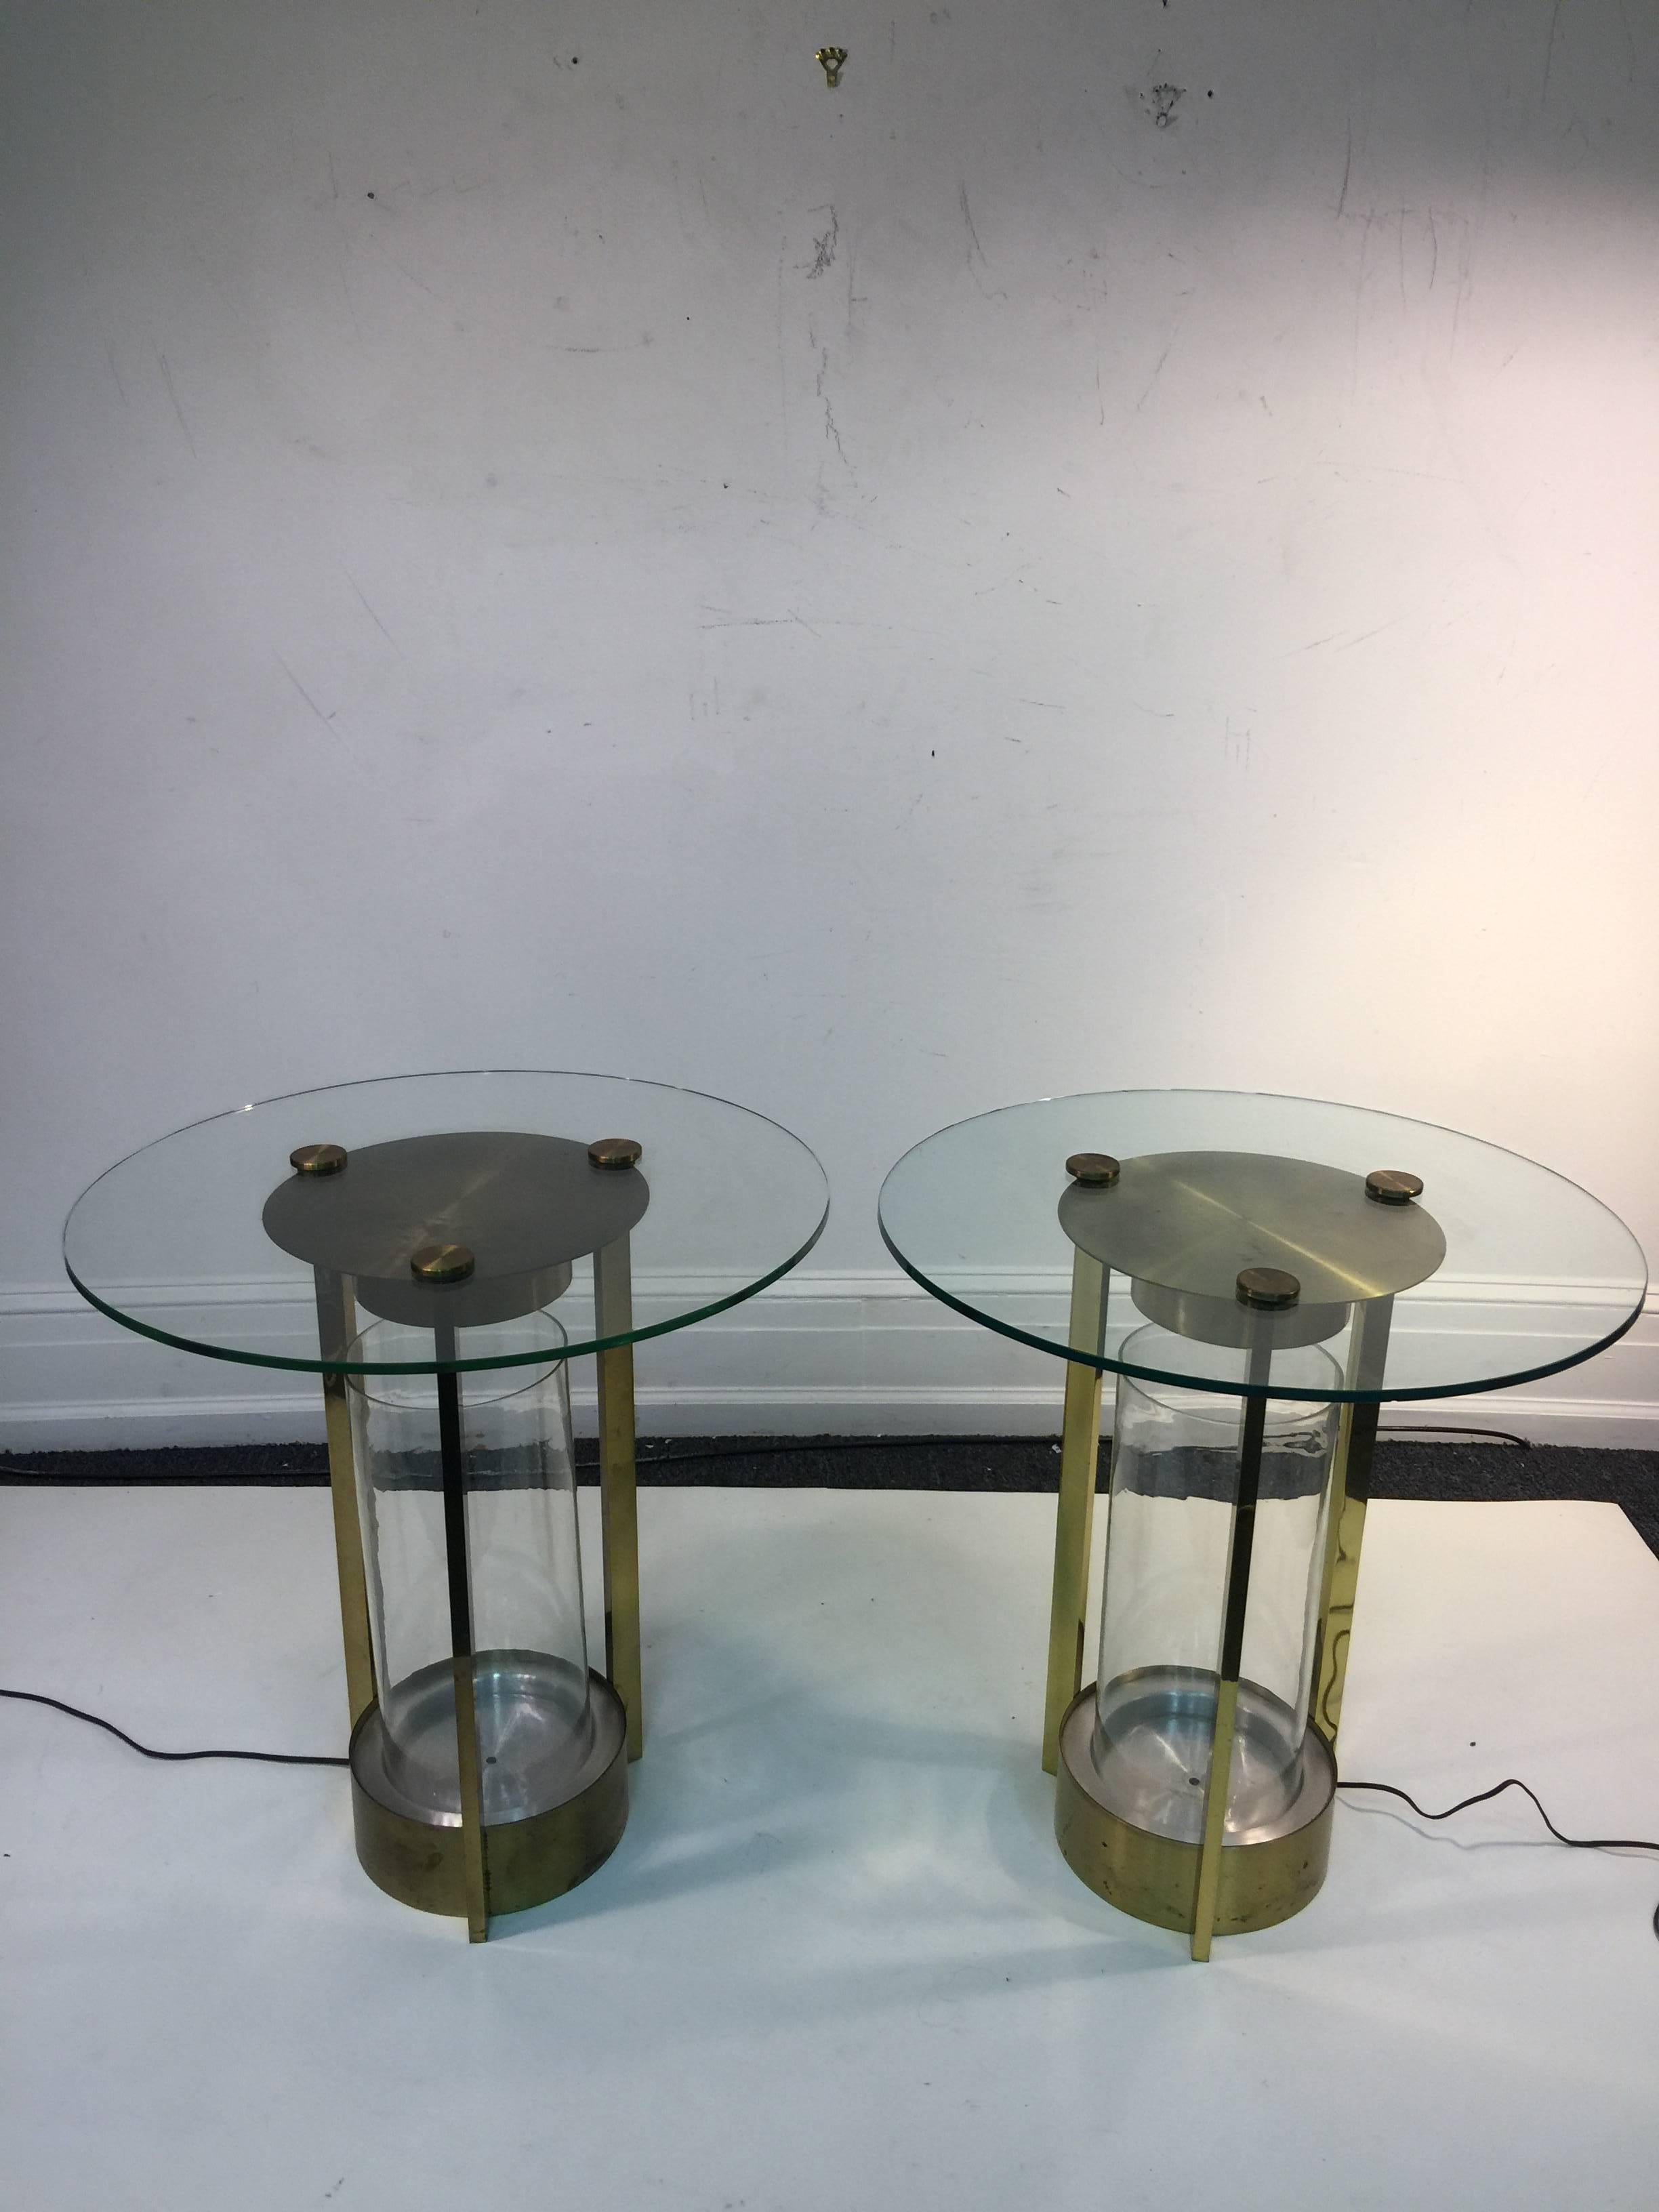 Pair of Dorothy Thorpe Modernist Art Deco Illumunated Brass Tables For Sale 6